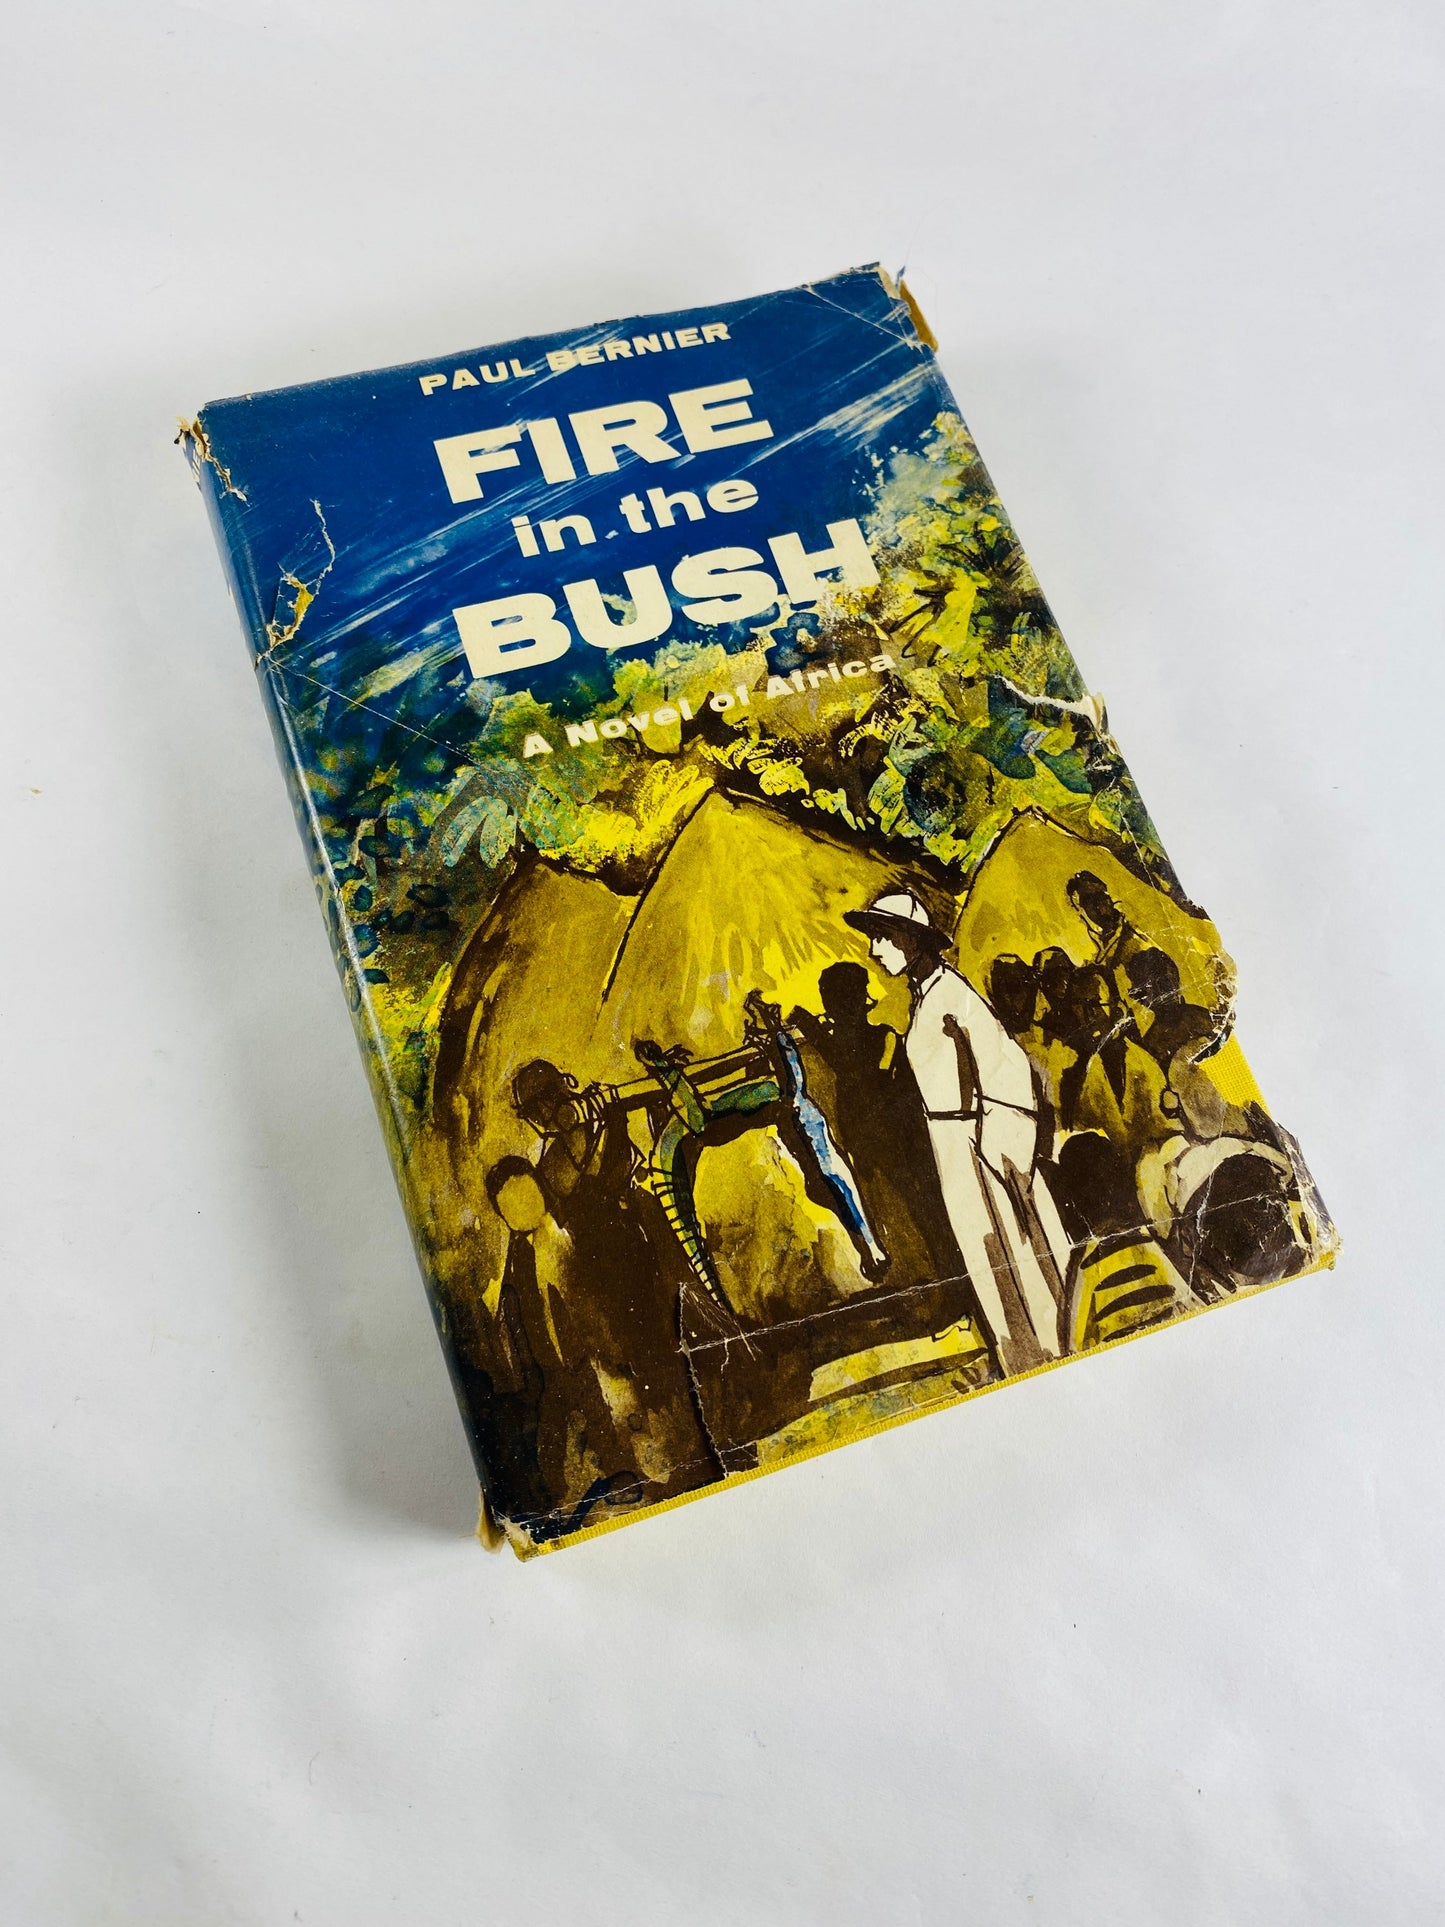 Fire in the Bush FIRST EDITION vintage book of Africa by Paul Bernier. Dust jacket P. J. Kenedy 1957. Roch Le Page. Vintage book. Gift